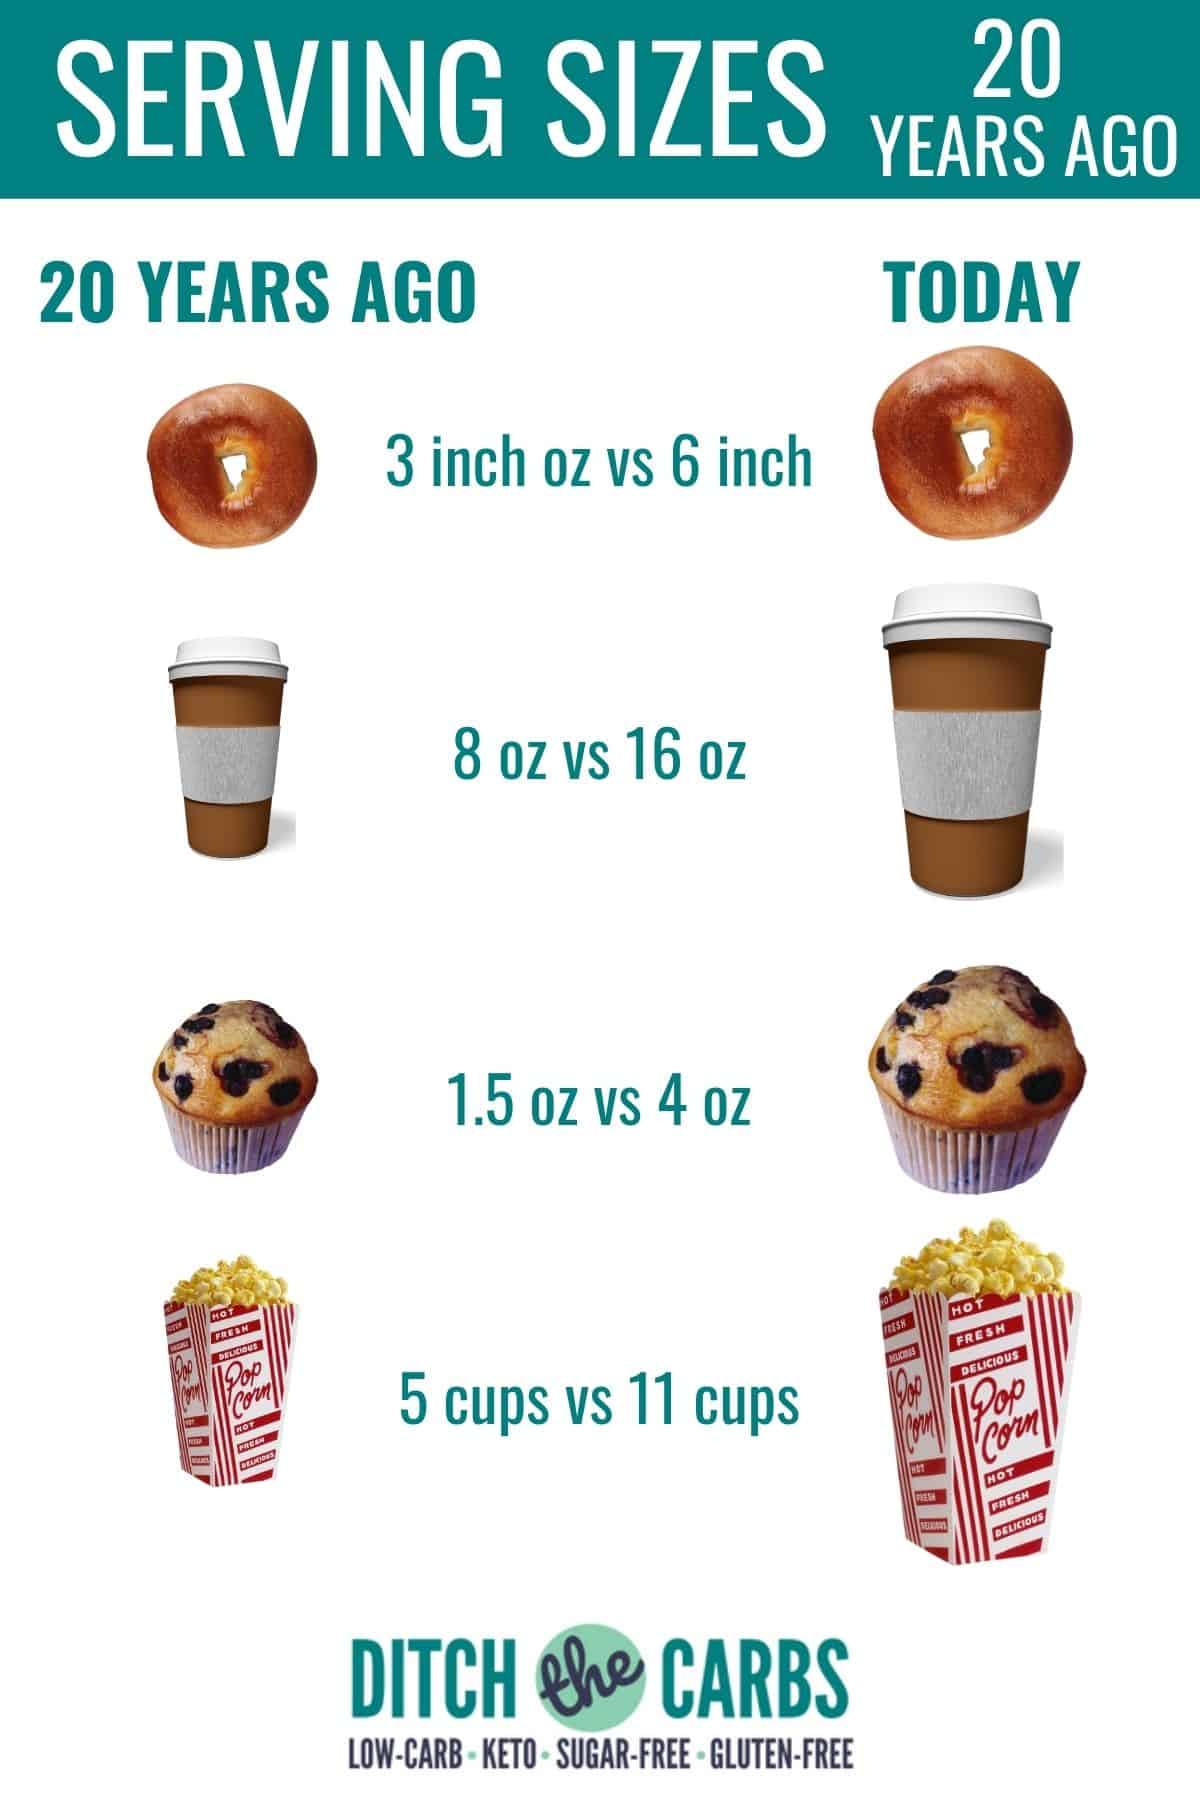 various portion sizes for food over the past 20 years